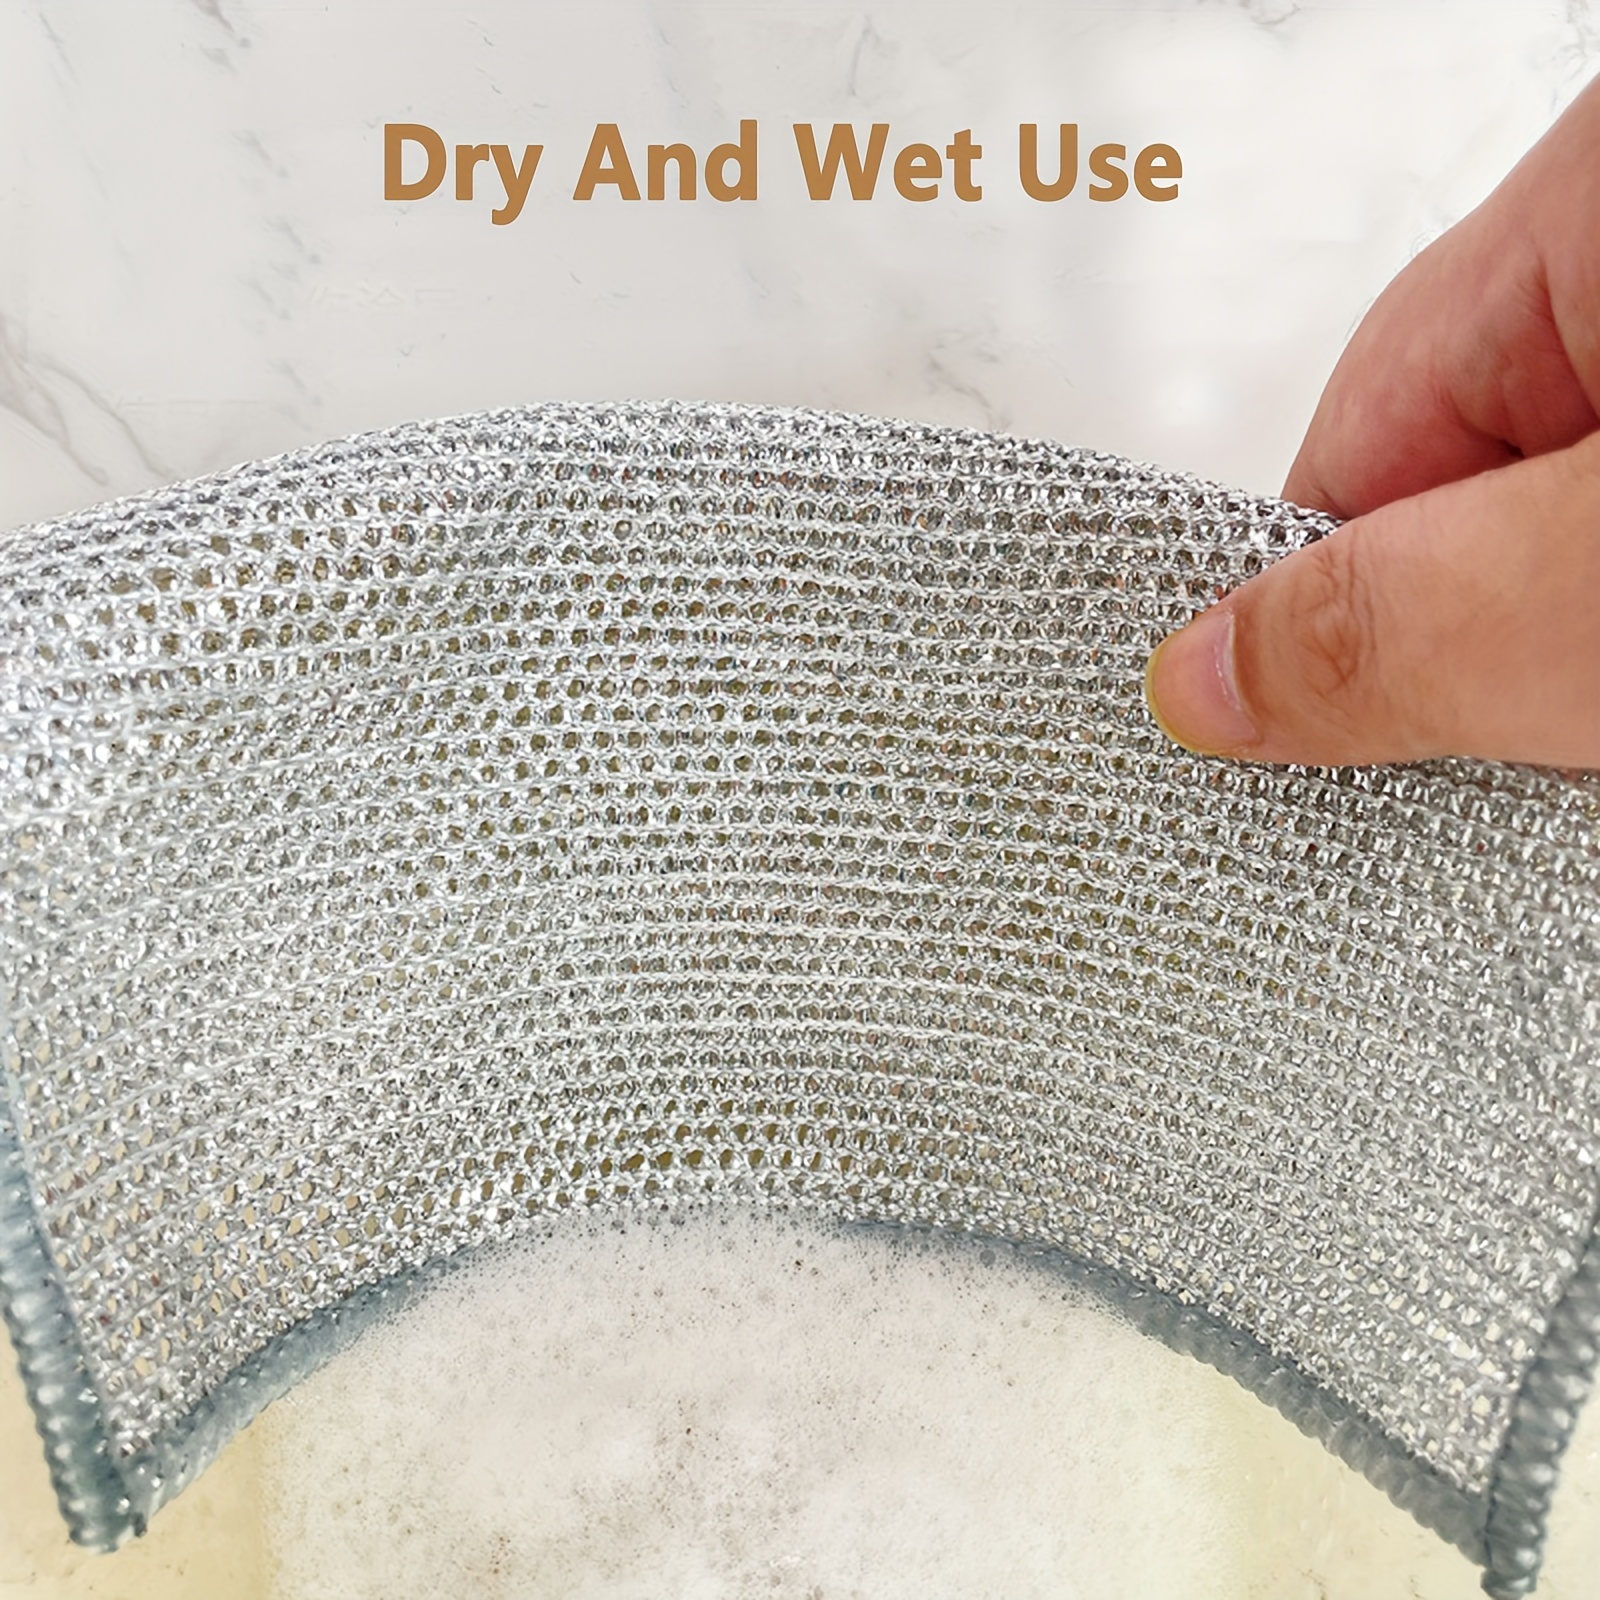 10 Pcs Wire Dishwashing Rags for Wet and Dry, Non-Scratch Wire Dishcloth  for Dishes, Sinks, Counters, Stove Tops, Easy Rinsing, Machine Washable 